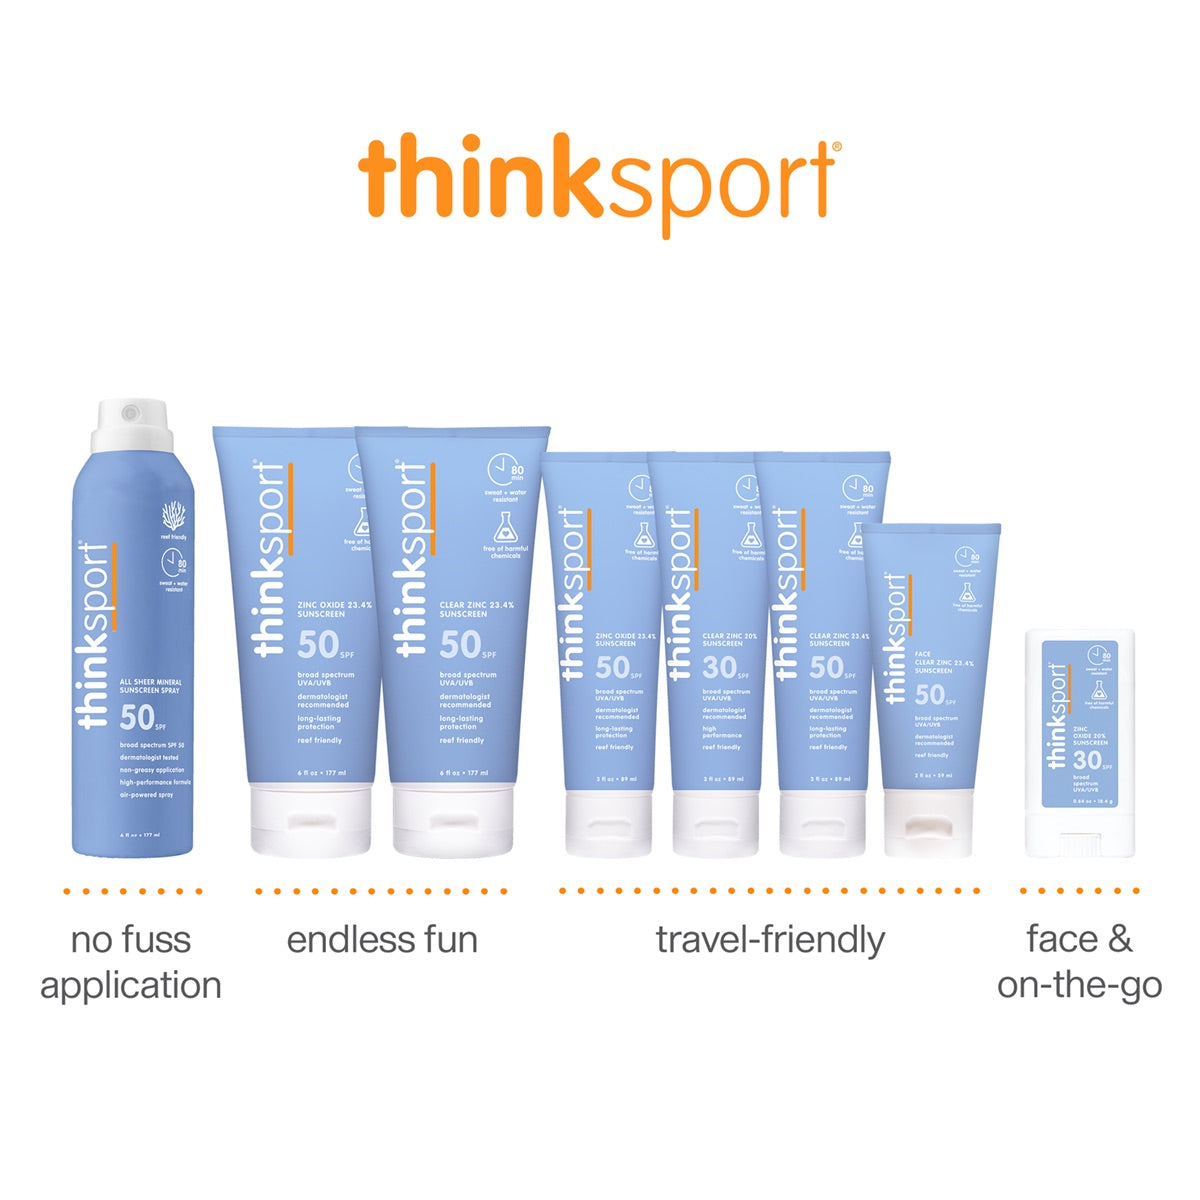 Assortment of ThinkSport sunscreen products ranging from sprays to lotions, with highlighted benefits such as &#39;no fuss application,&#39; &#39;endless fun,&#39; &#39;travel-friendly,&#39; and &#39;face &amp; on-the-go&#39;.